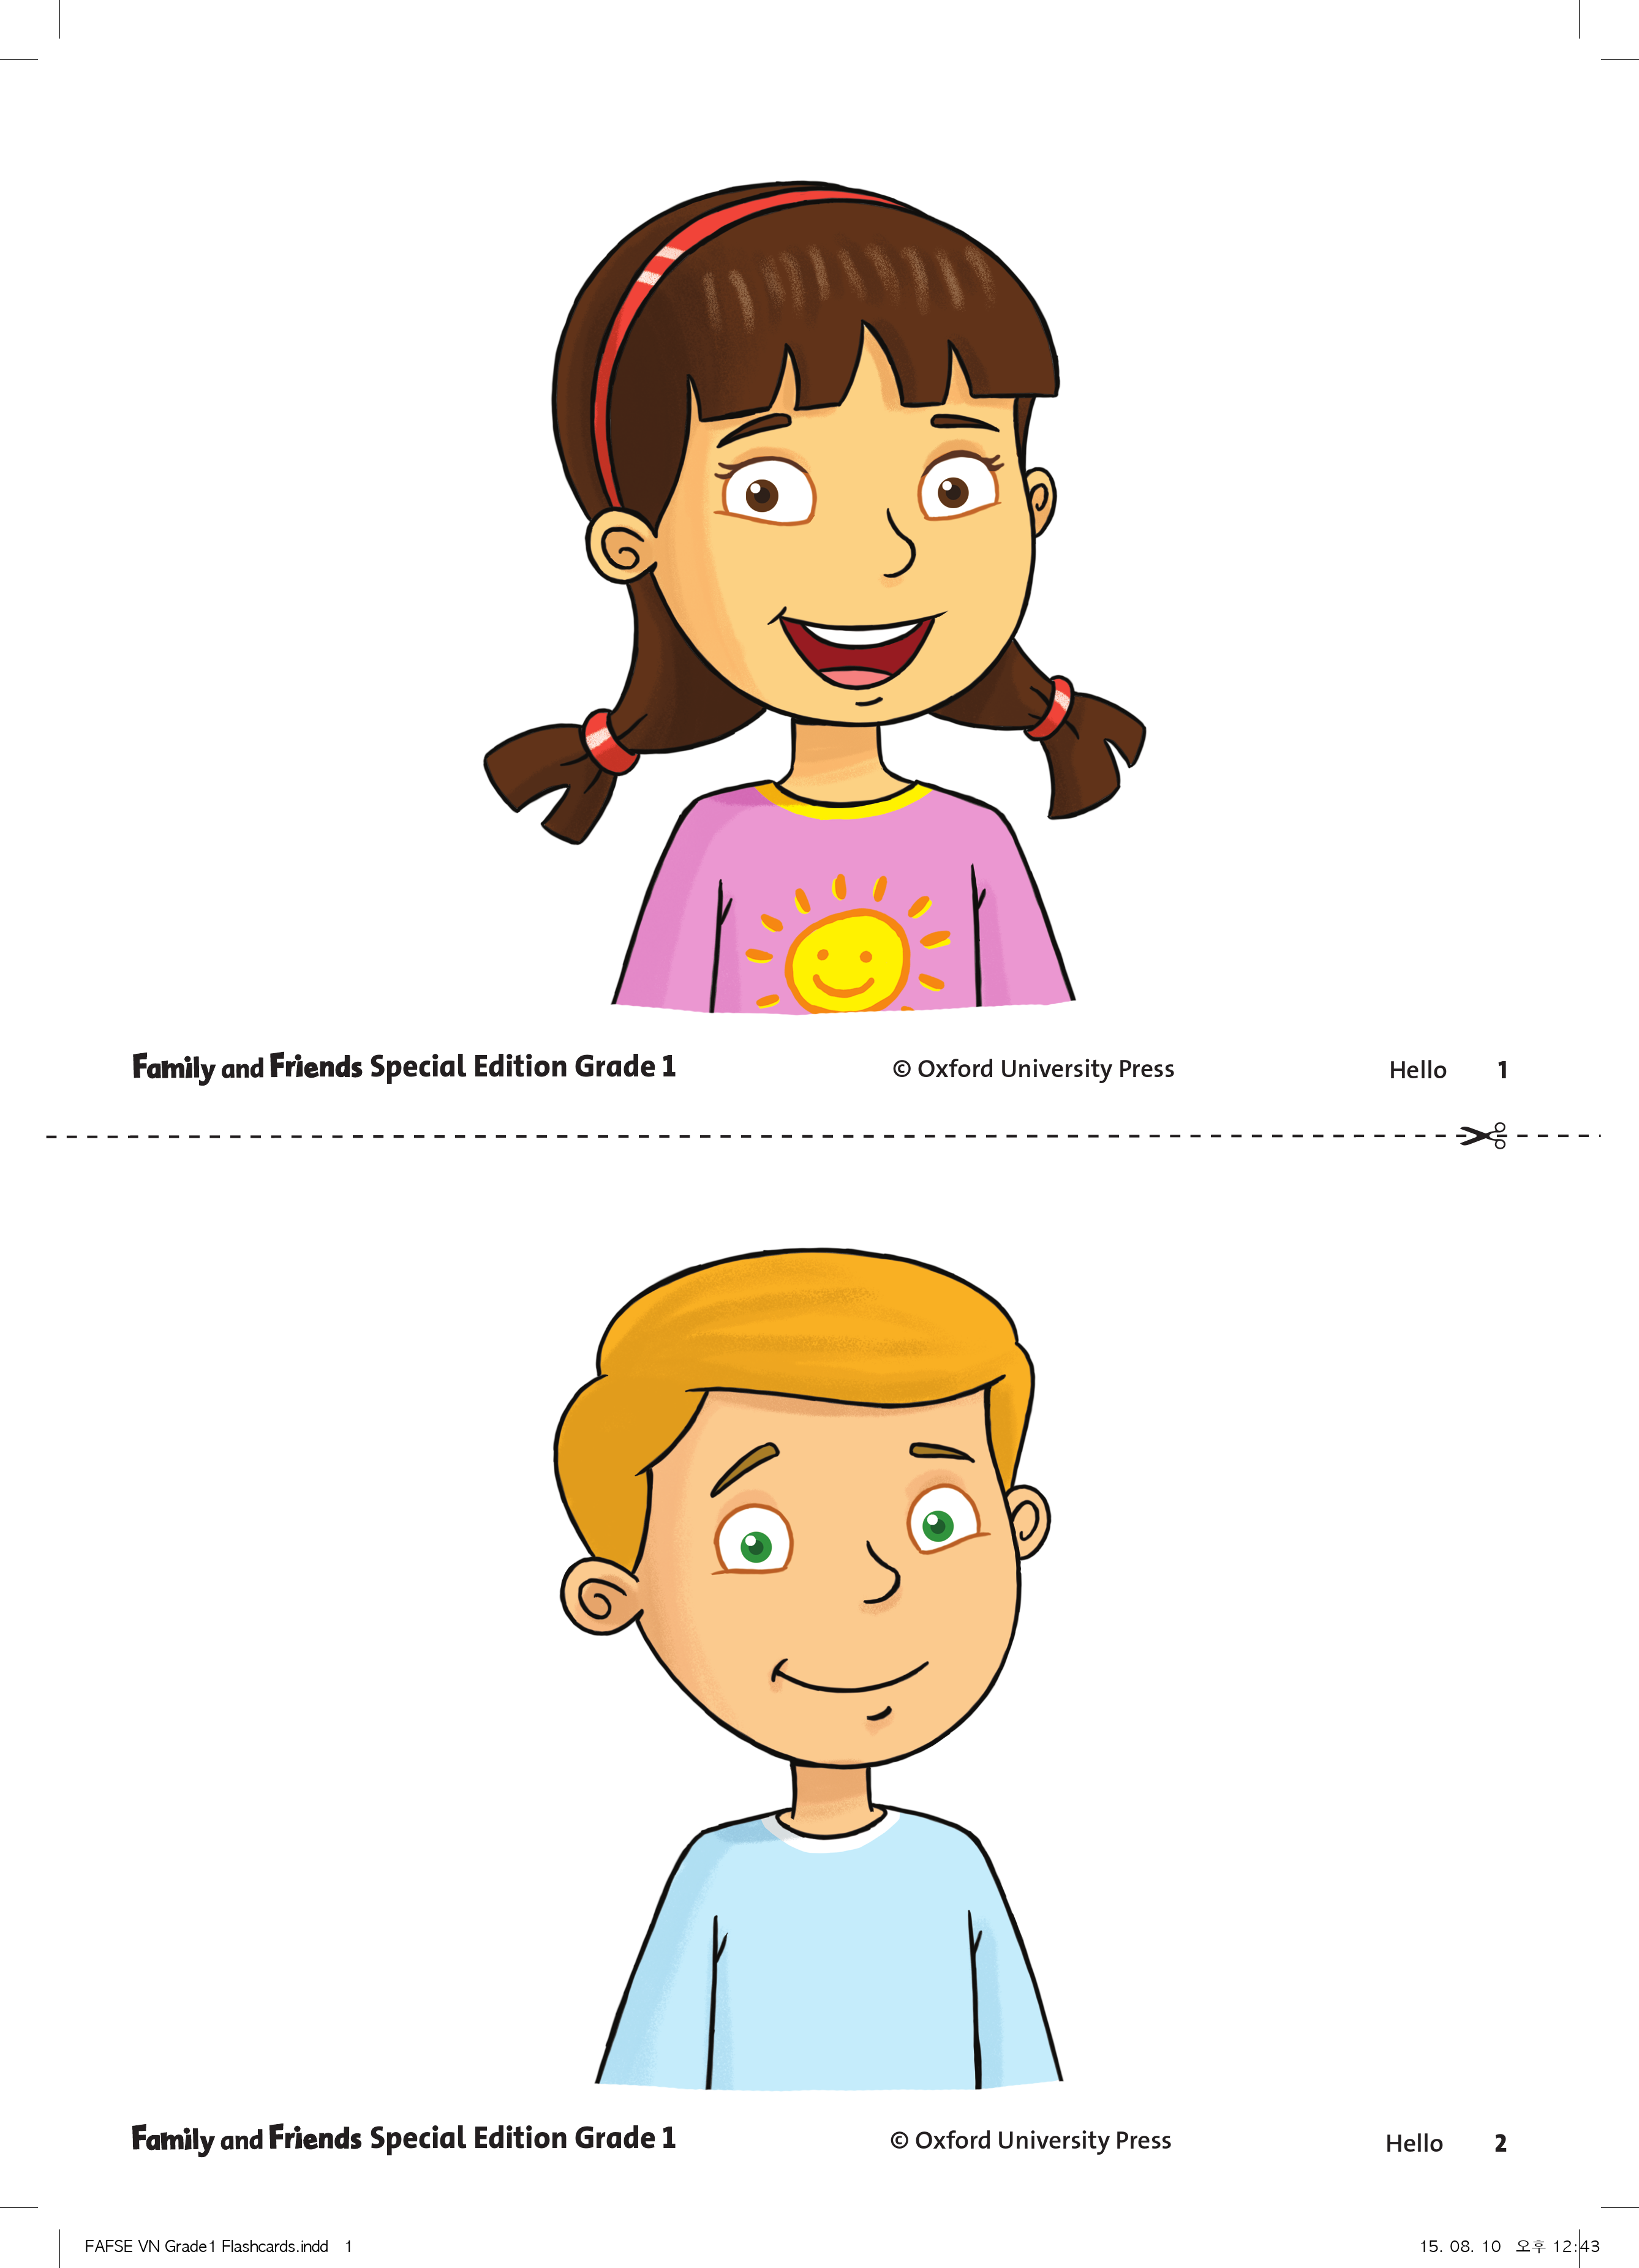 Family and friends Starter карточки. Family and friends Starter Flashcards. Family and friends 1 Flashcards. Family and friends 1 2nd Edition Flashcards.